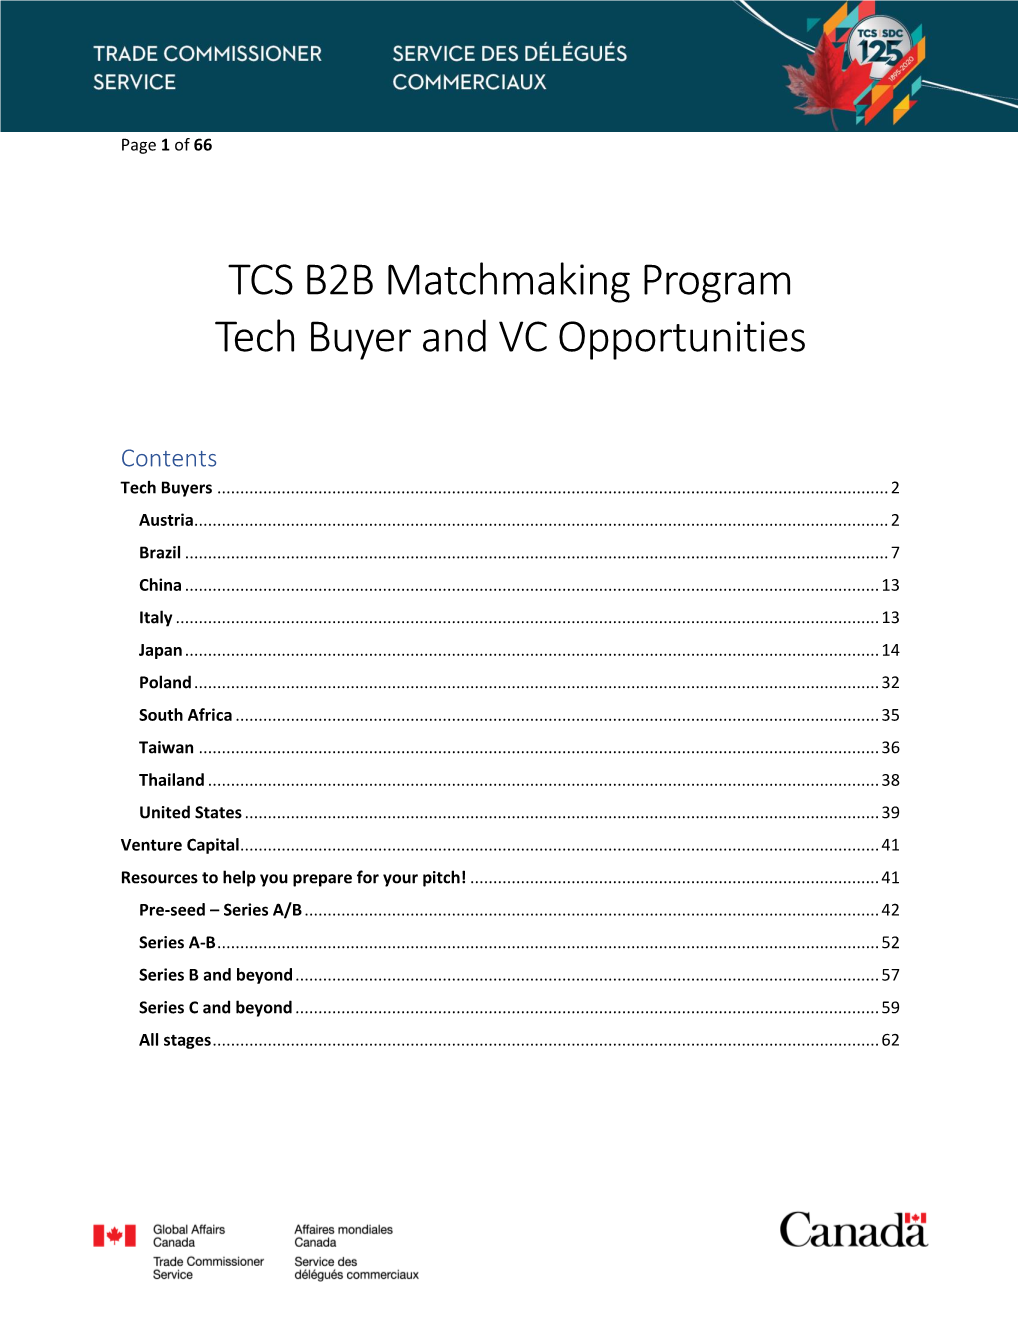 TCS B2B Matchmaking Program Tech Buyer and VC Opportunities